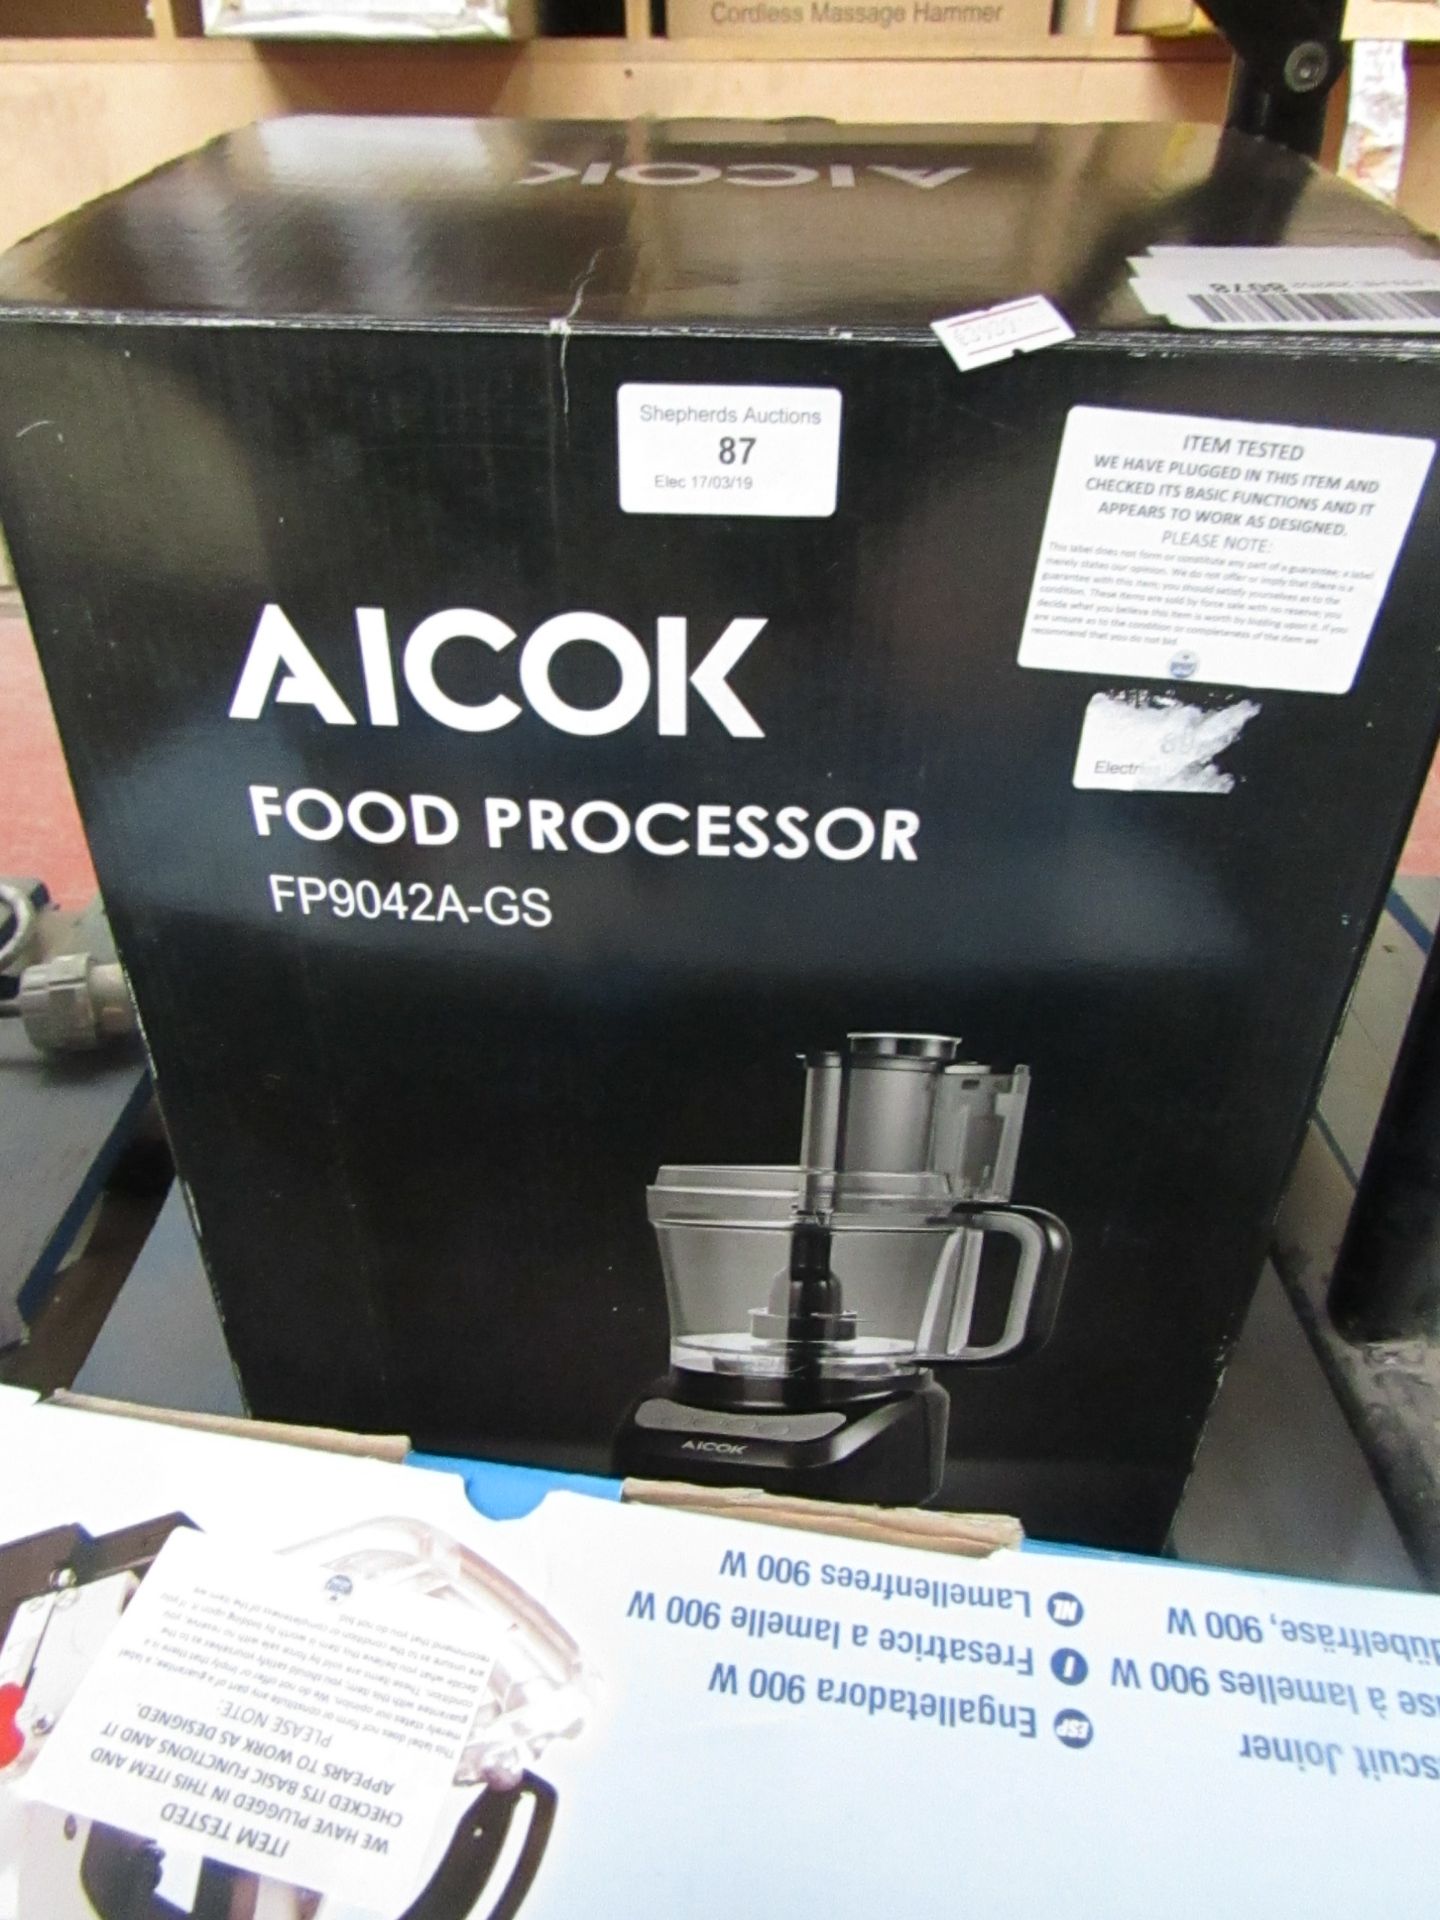 Alcok food processor tested working and boxed